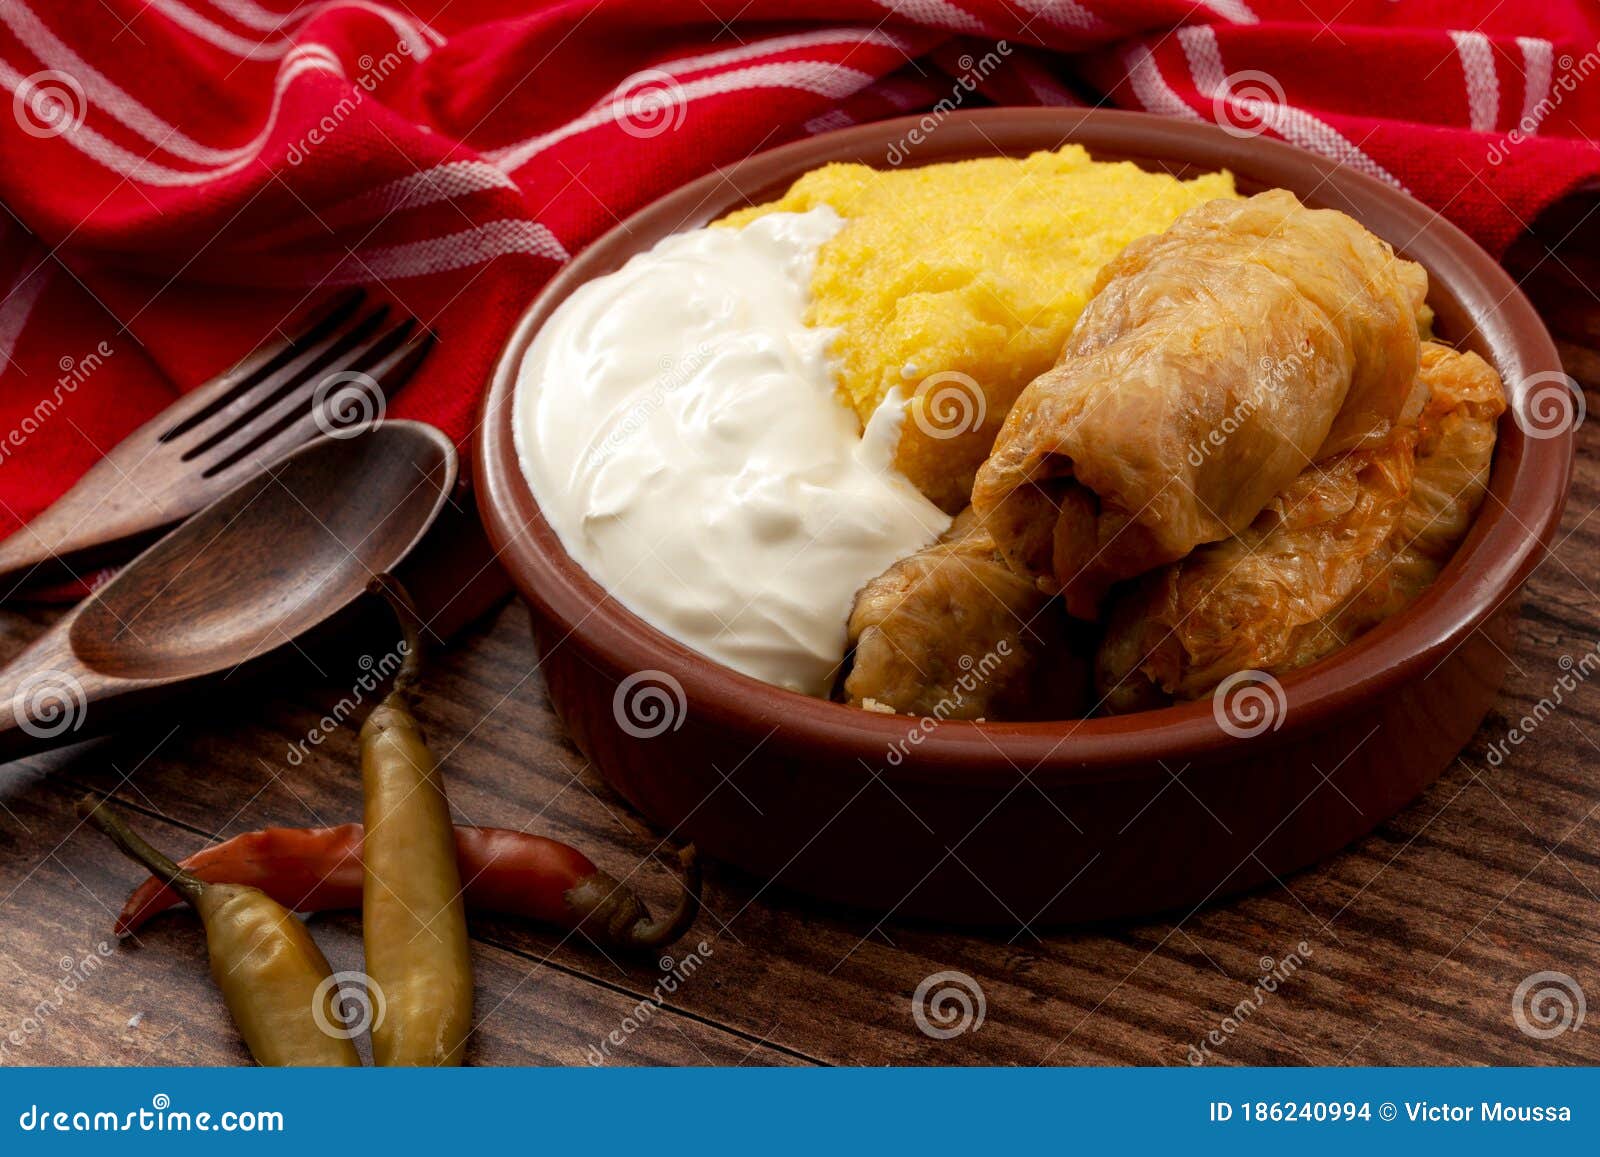 eastern european recipes and traditional cuisine concept with cabbage rolls serbian: sarma or romanian: sarmale stuffed with